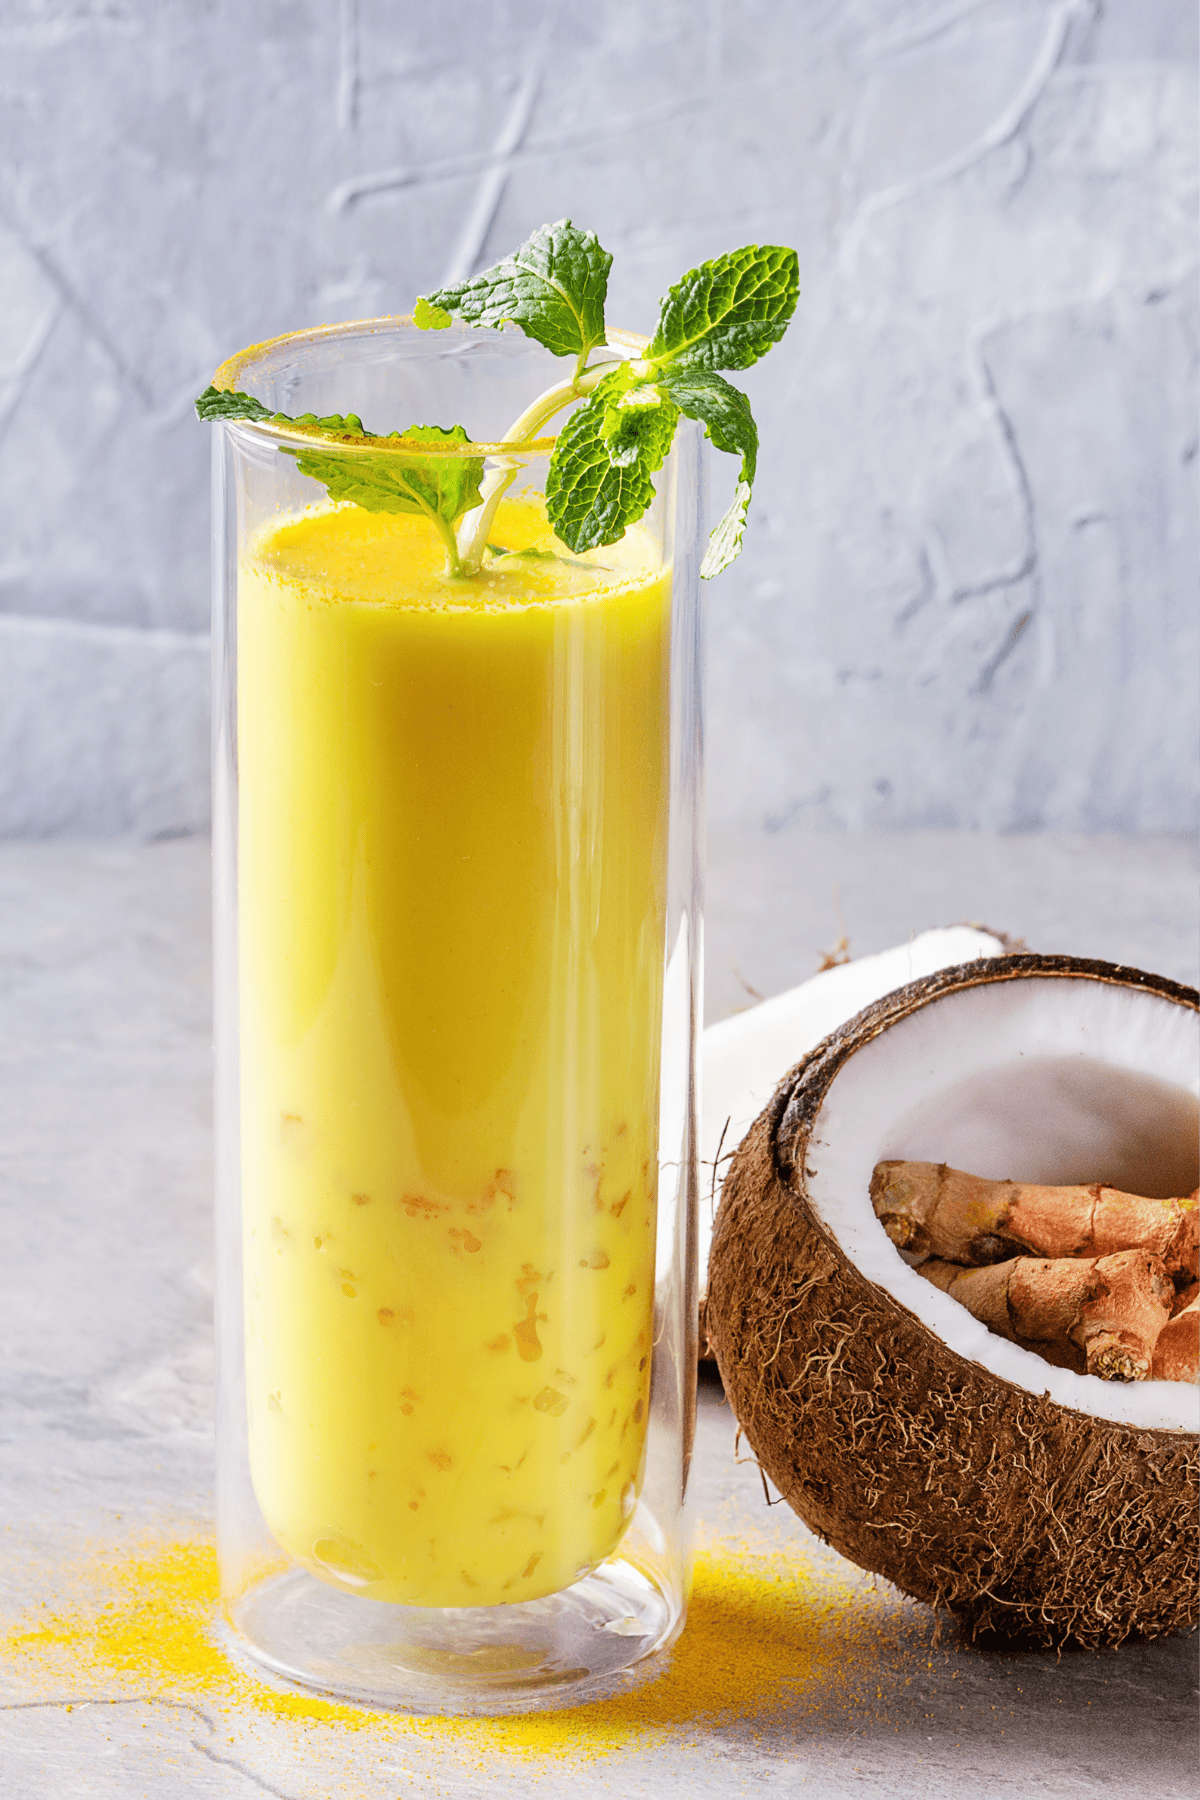 A glass of probiotic smoothie made with mango, turmeric, and kefir.